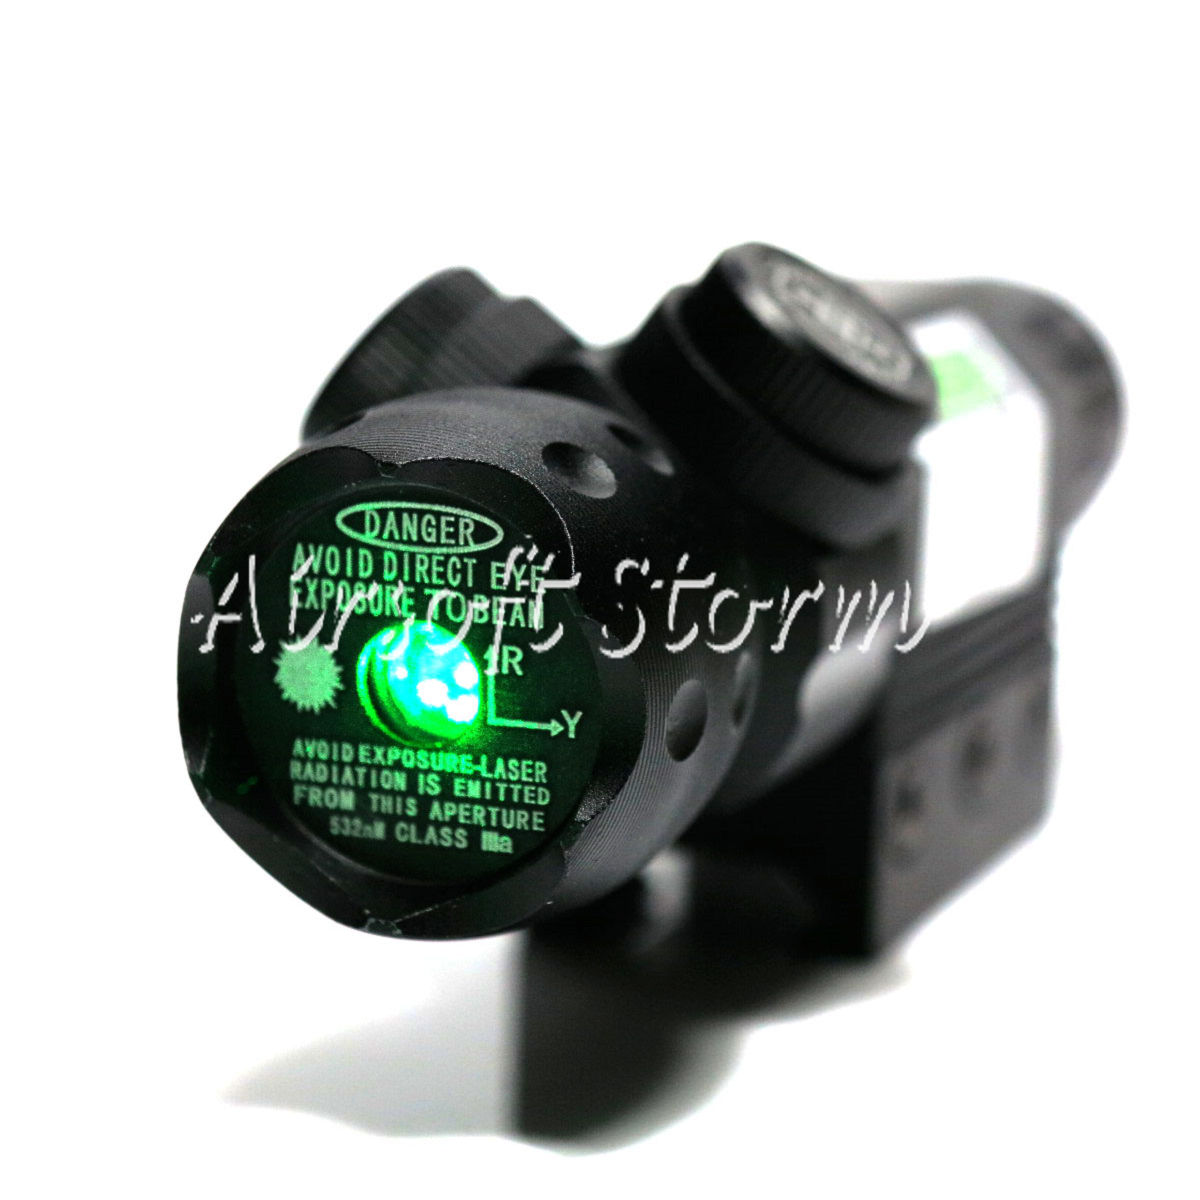 LXGD Tactical Gear Rifle AEG Green Laser Tactical Head Sight Pointer JG-020 - Click Image to Close